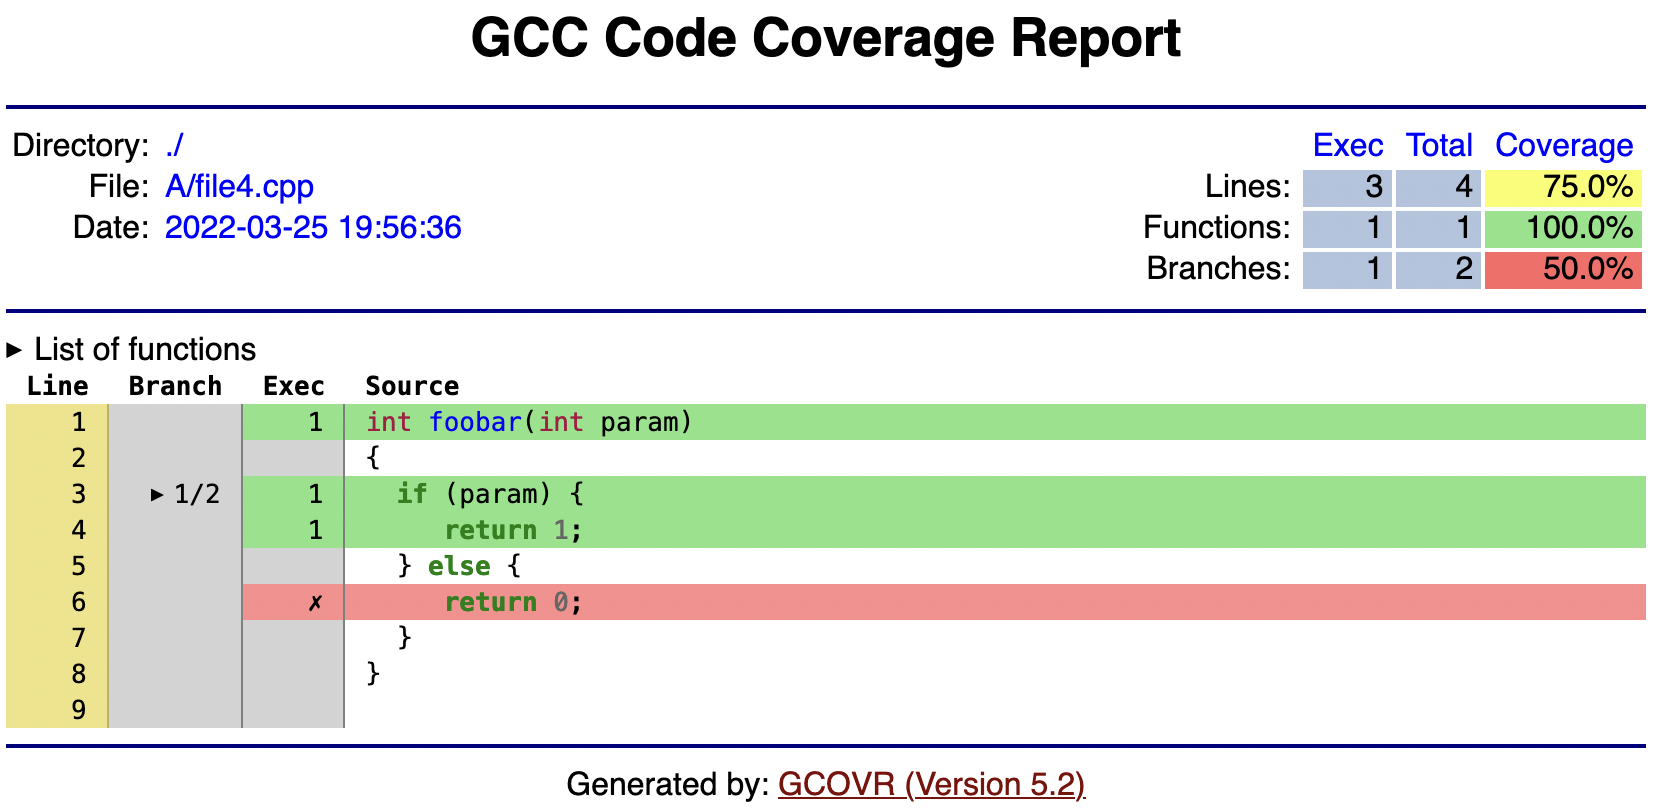 https://raw.githubusercontent.com/gcovr/gcovr/5.2/doc/images/screenshot-html-details.example.cpp.png